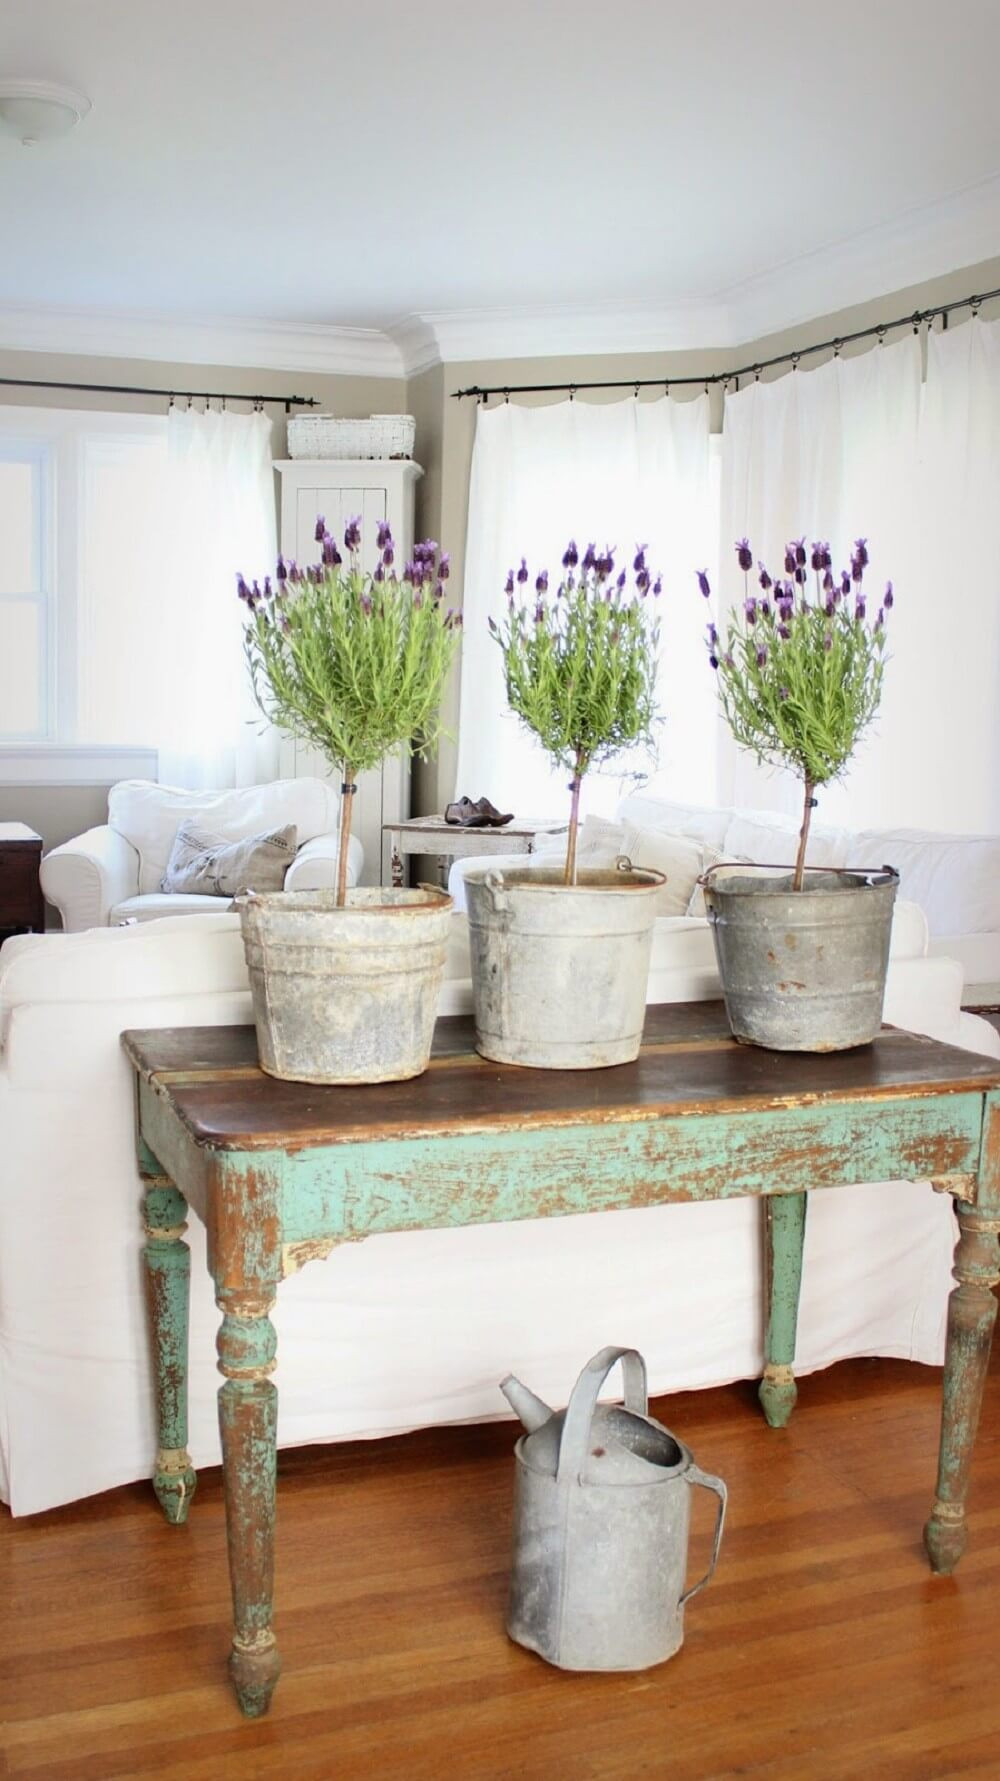 Spring Ideas Decorating
 28 Best Spring Decoration Ideas and Designs for 2020